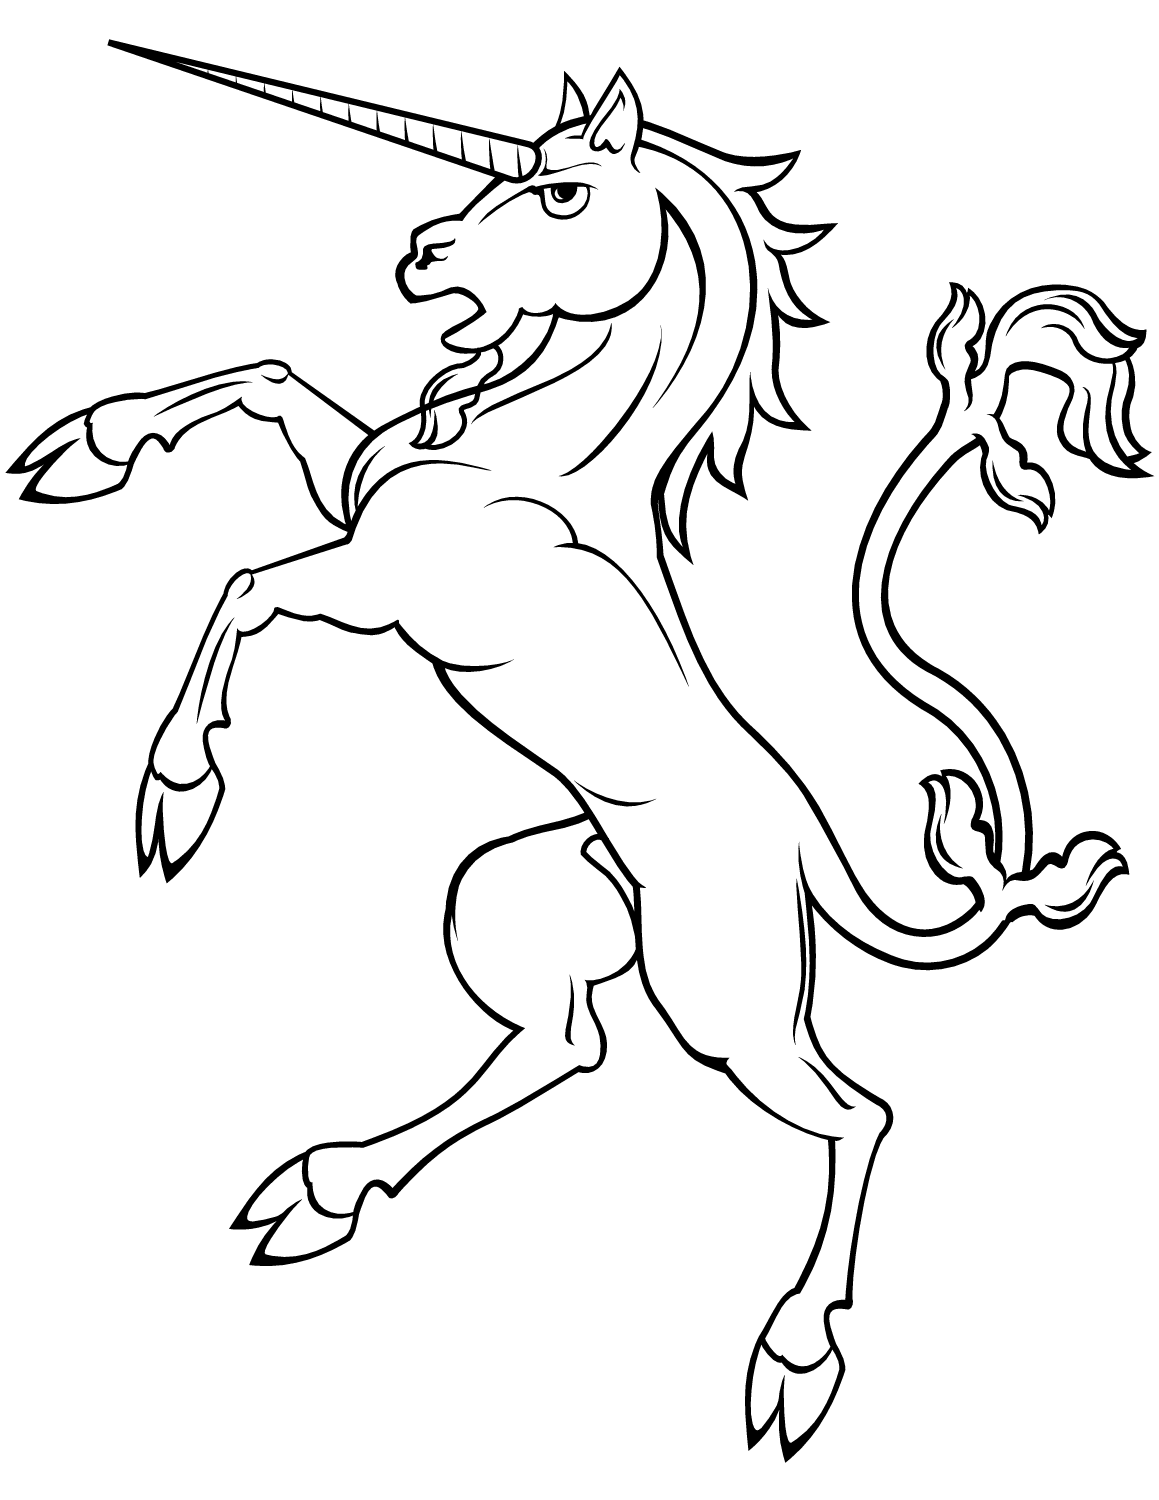 Rearing Unicorn 1 Coloring Page